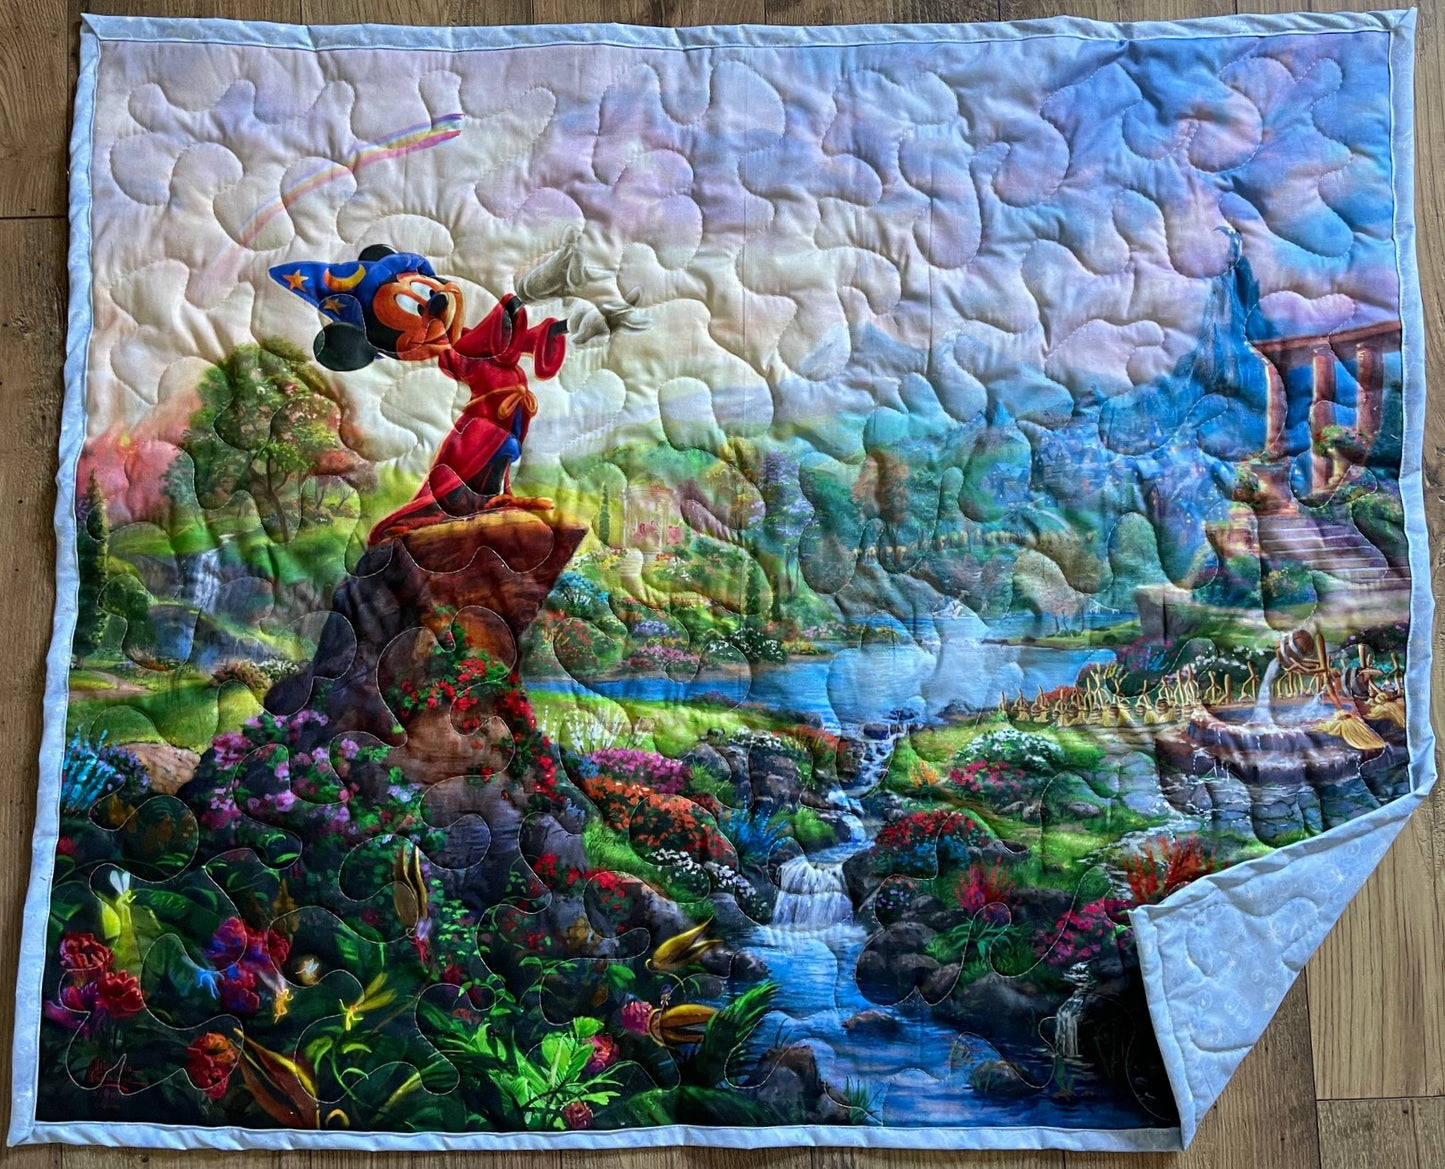 DISNEY FANTASMIC SORCERER MICKEY MOUSE Inspired Quilted Blanket 36"x44" Digital Printed Fabric